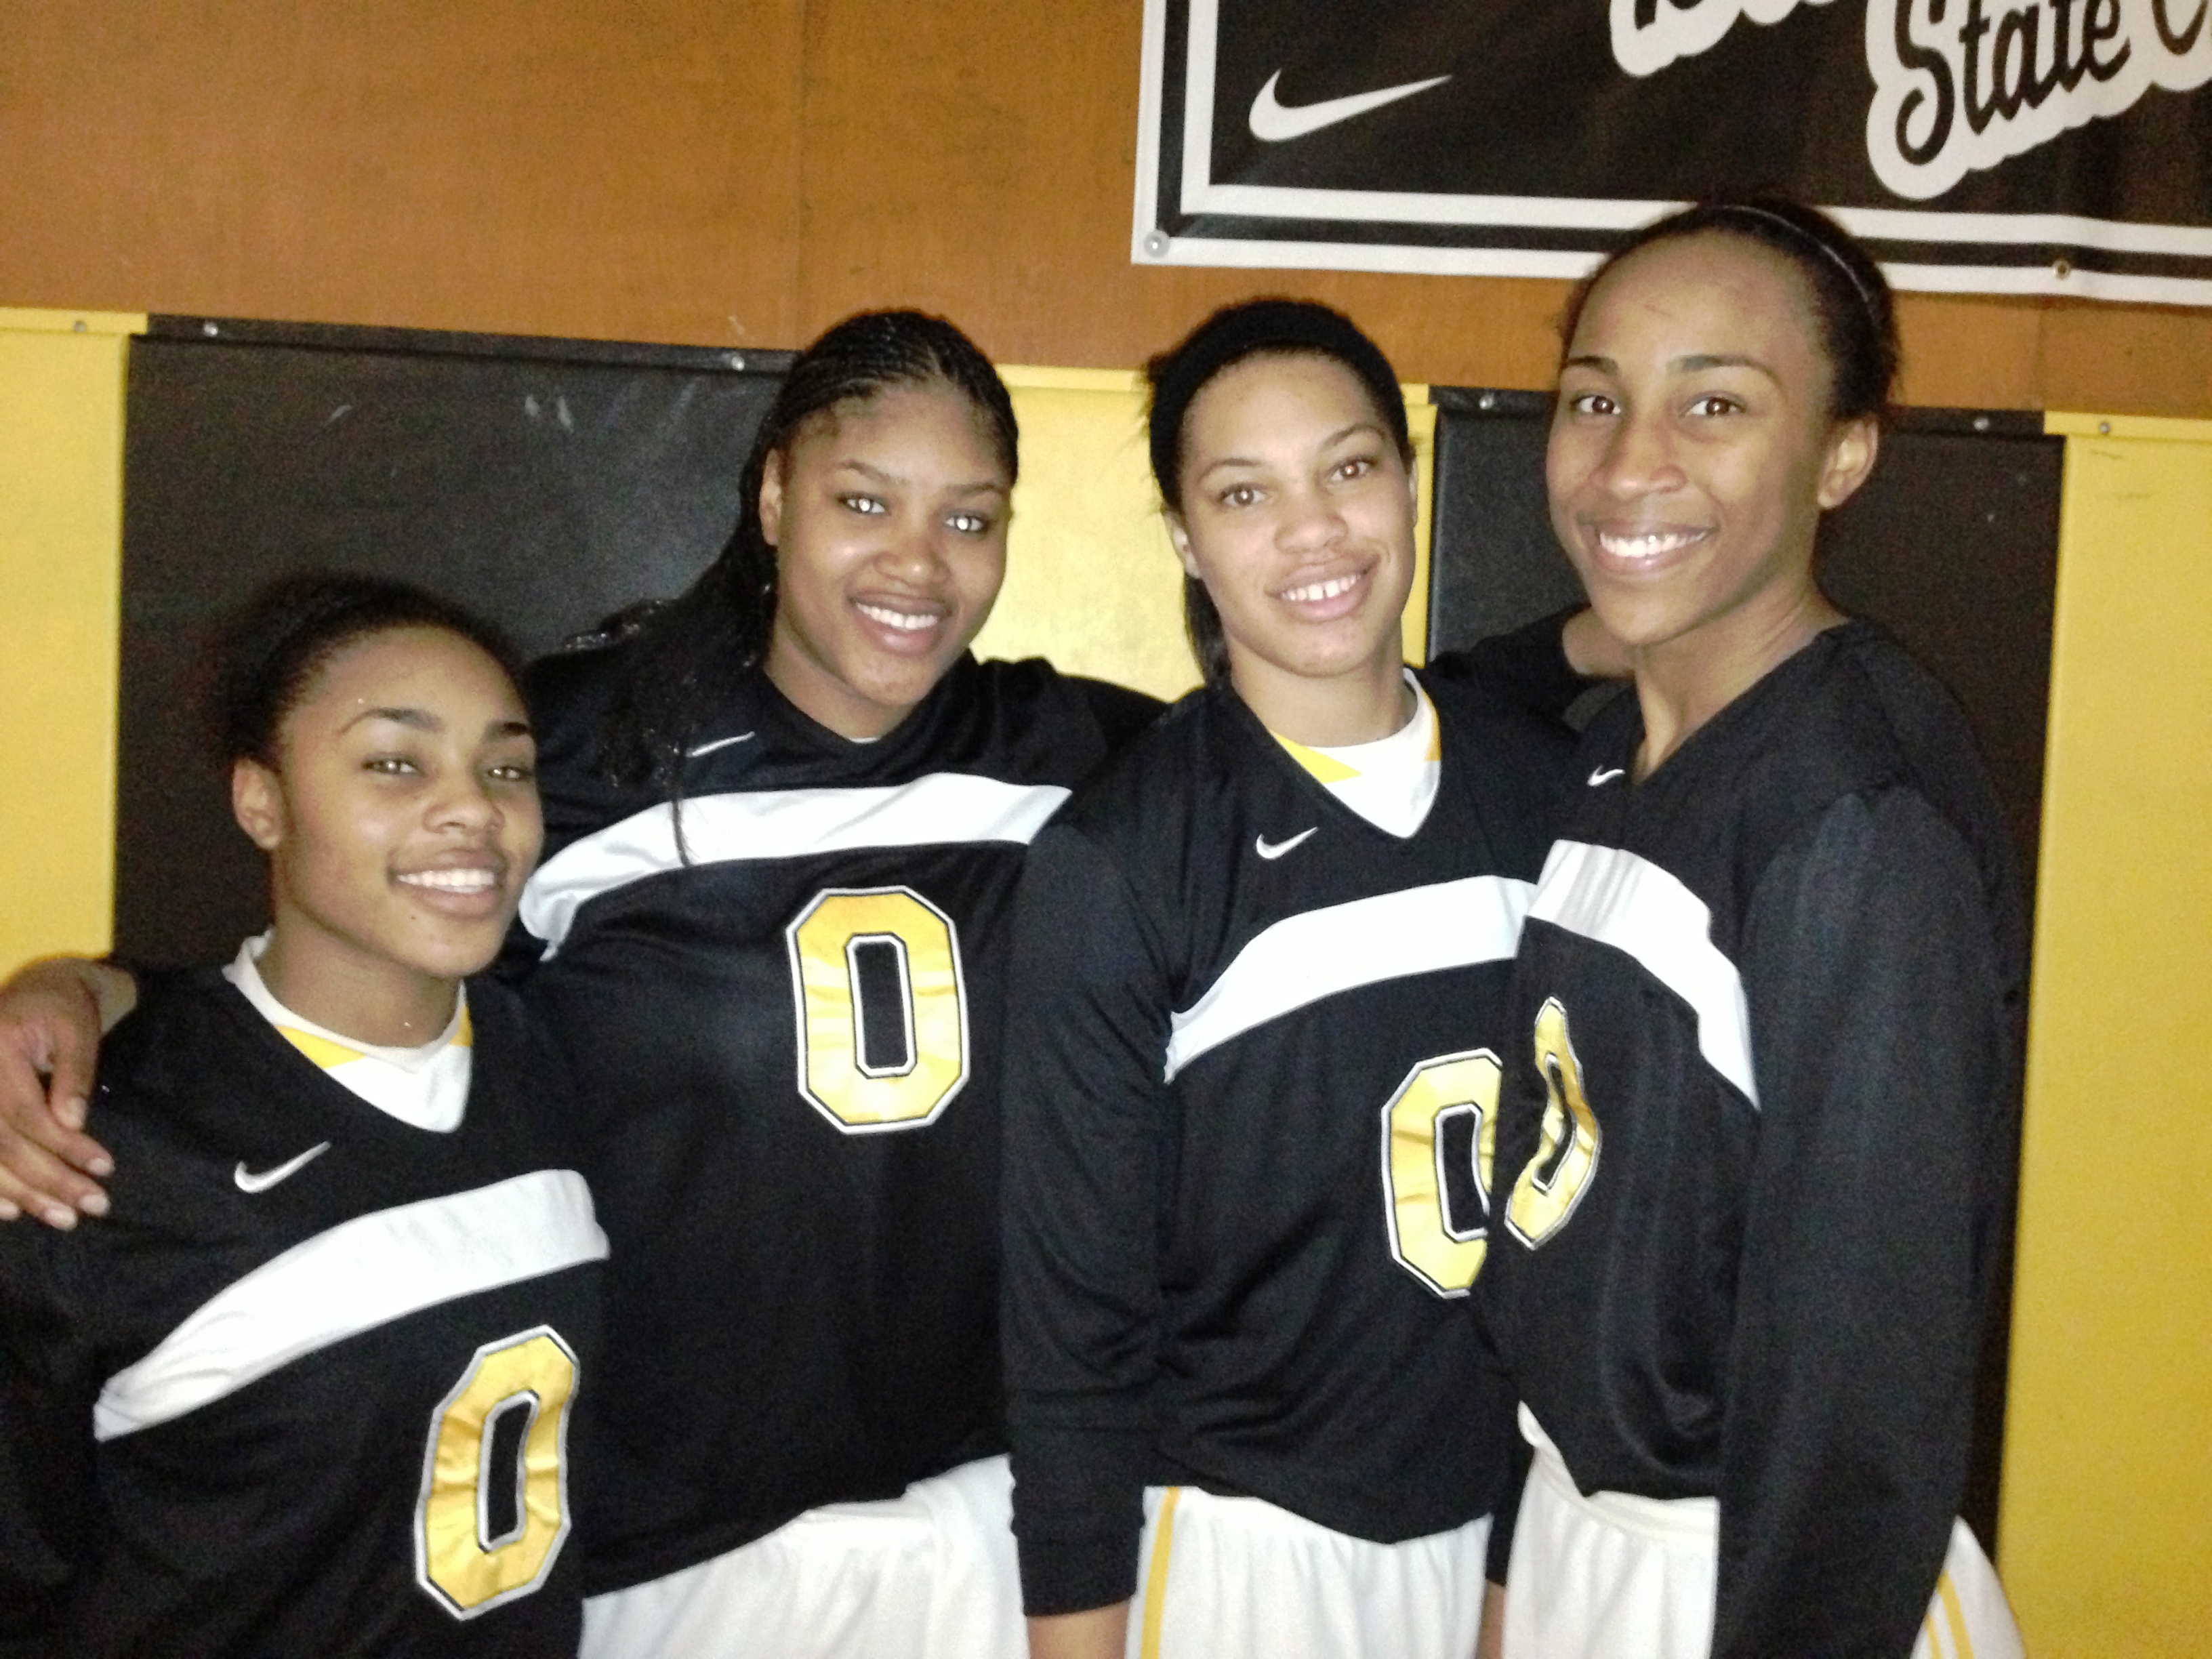 National power Bishop O'Dowd has four college-bound standouts -- Ariell Bostick, K.C. Waters, Breanna Brown and Oderah Chidom -- who have led team to No. 1 ranking in Northern California. Photo: Harold Abend.